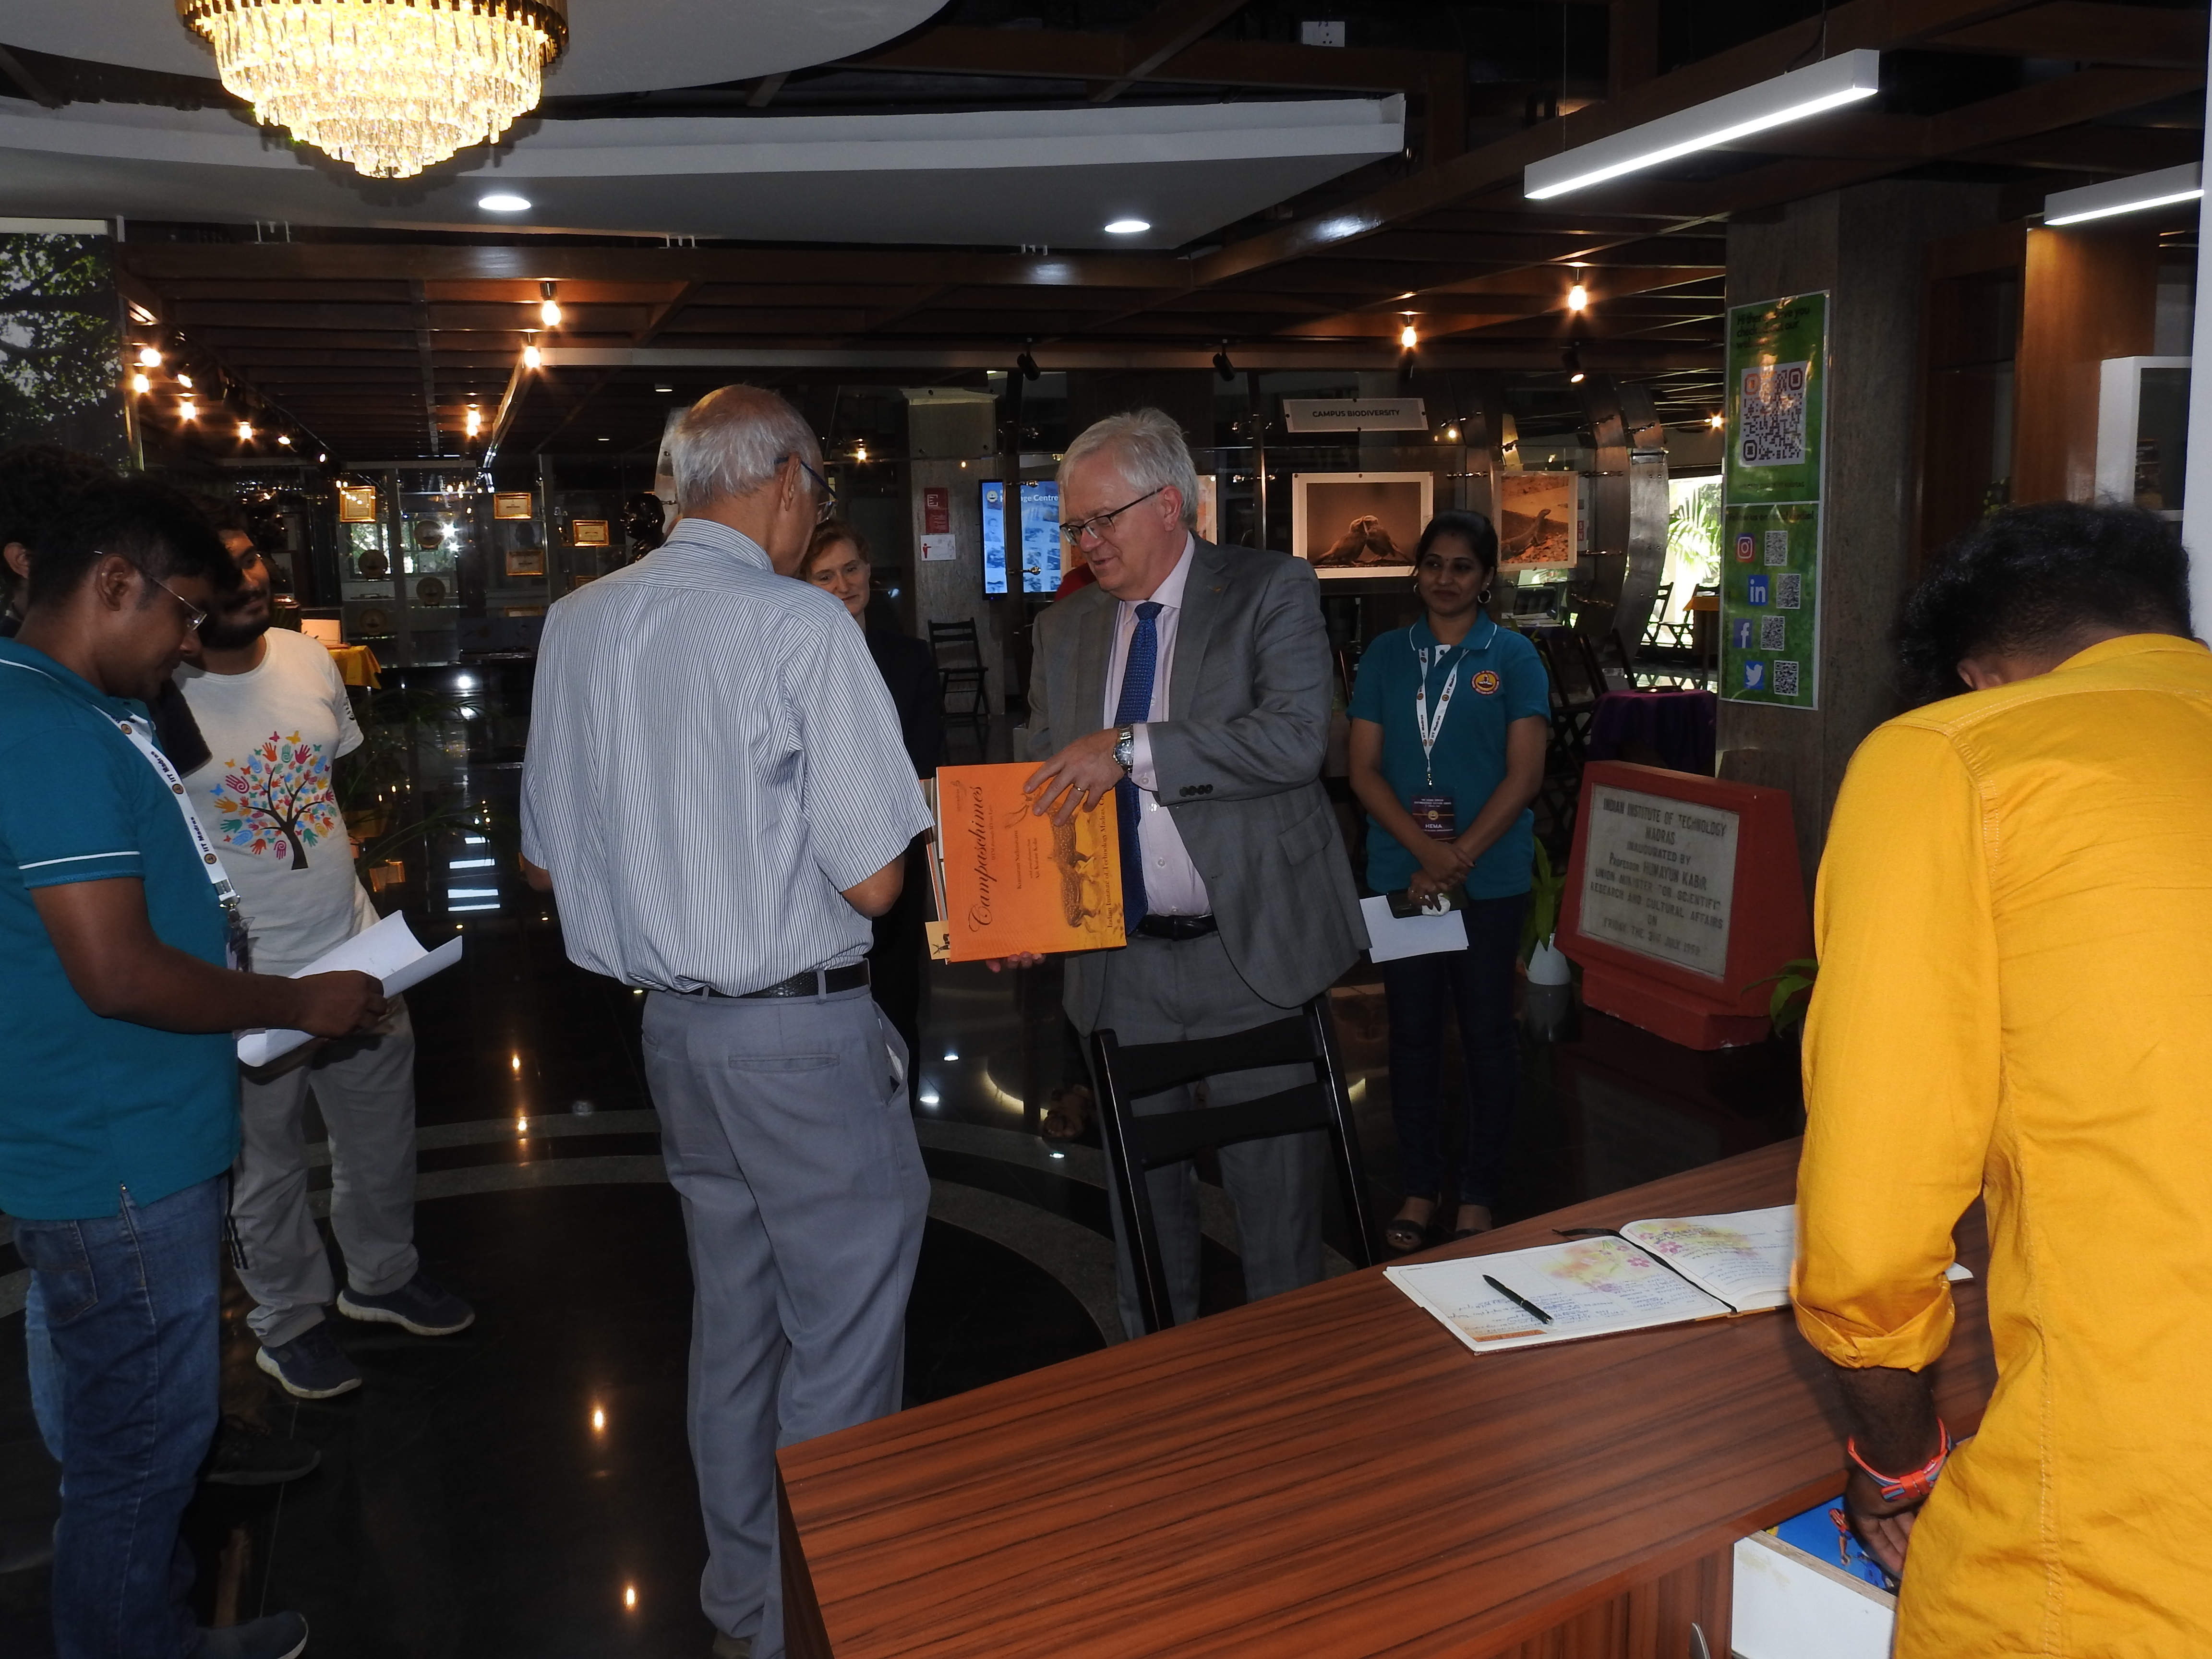 Prof. Schmidt receives a copy of Campaschimes, a coffee table book on the history of IIT Madras